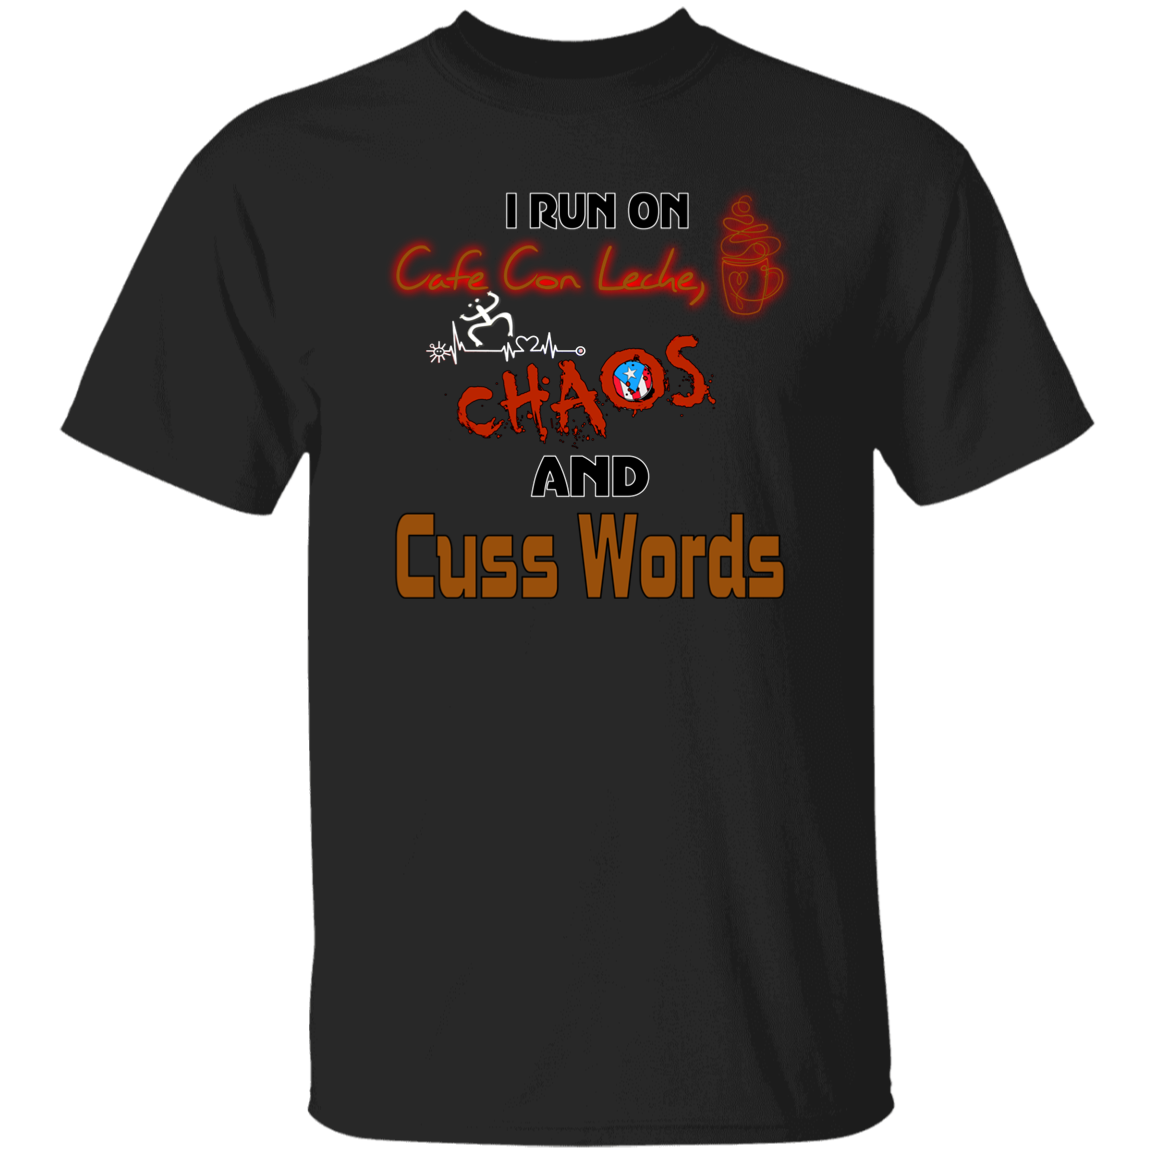 Cafe Con Leche, Chaos and Cuss Words 5.3 oz. T-Shirt